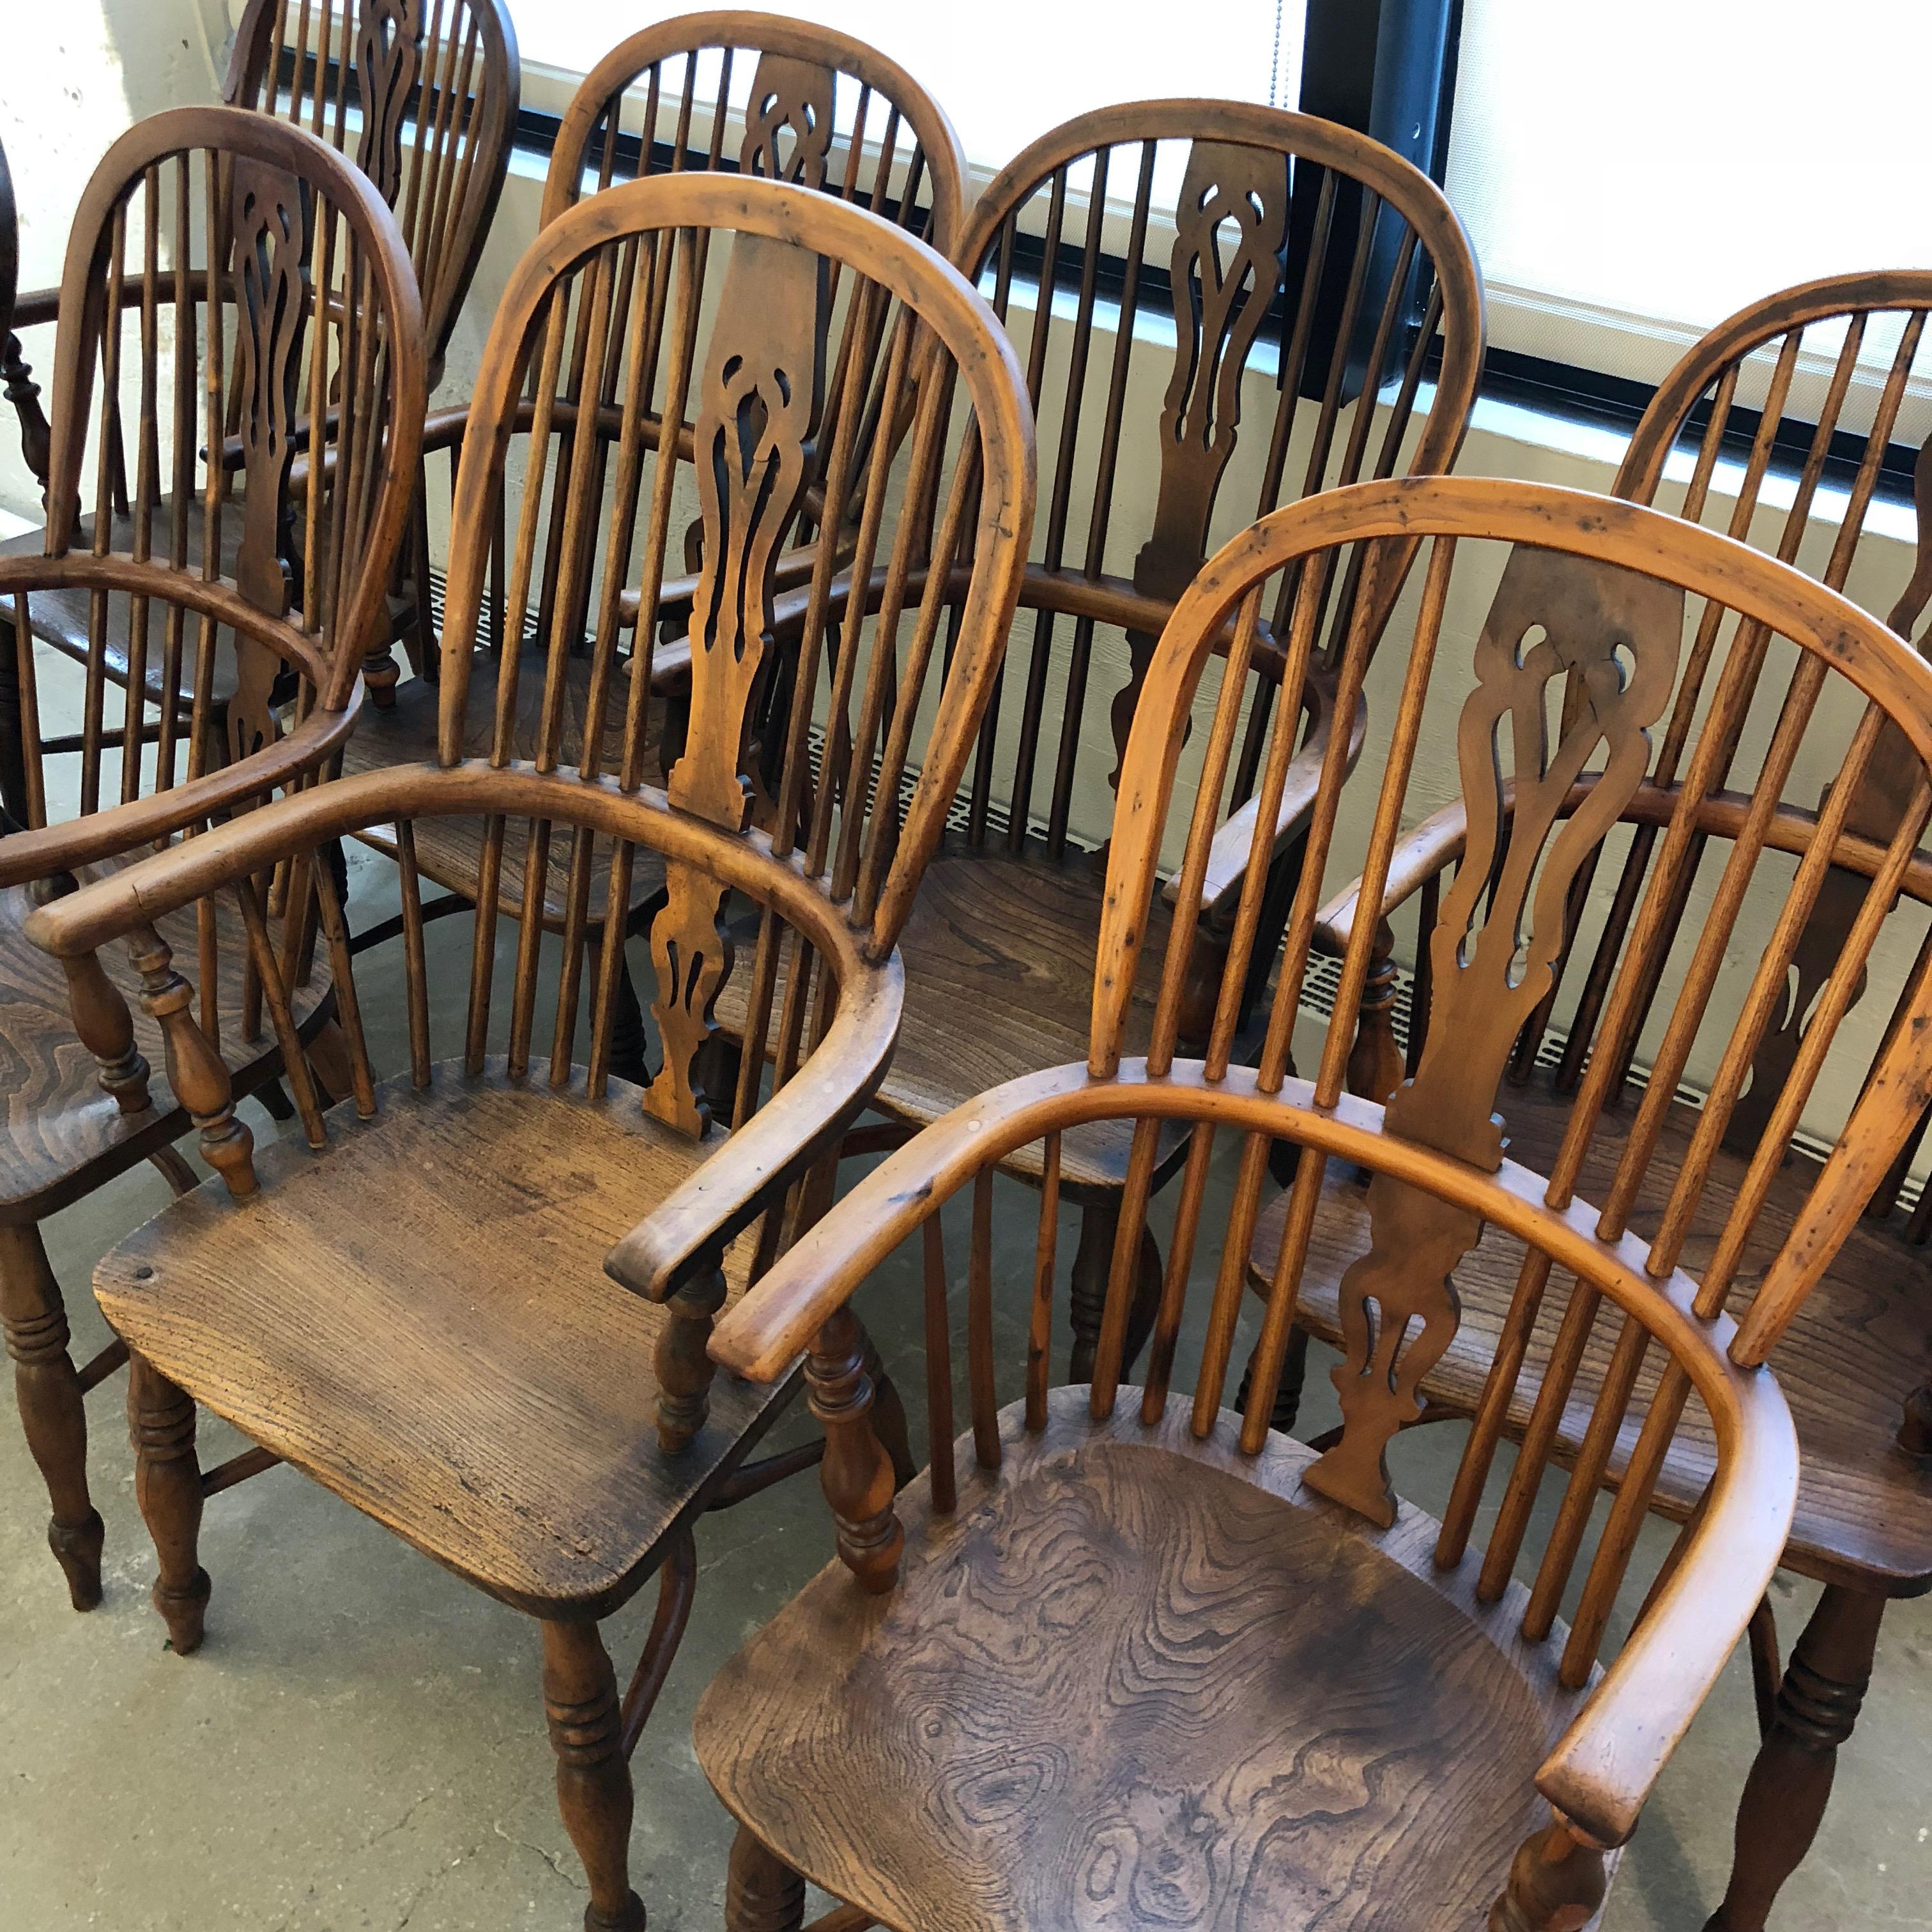 English Set of 8 Late 18th-Early 19th Century Yew Wood Dining Chairs